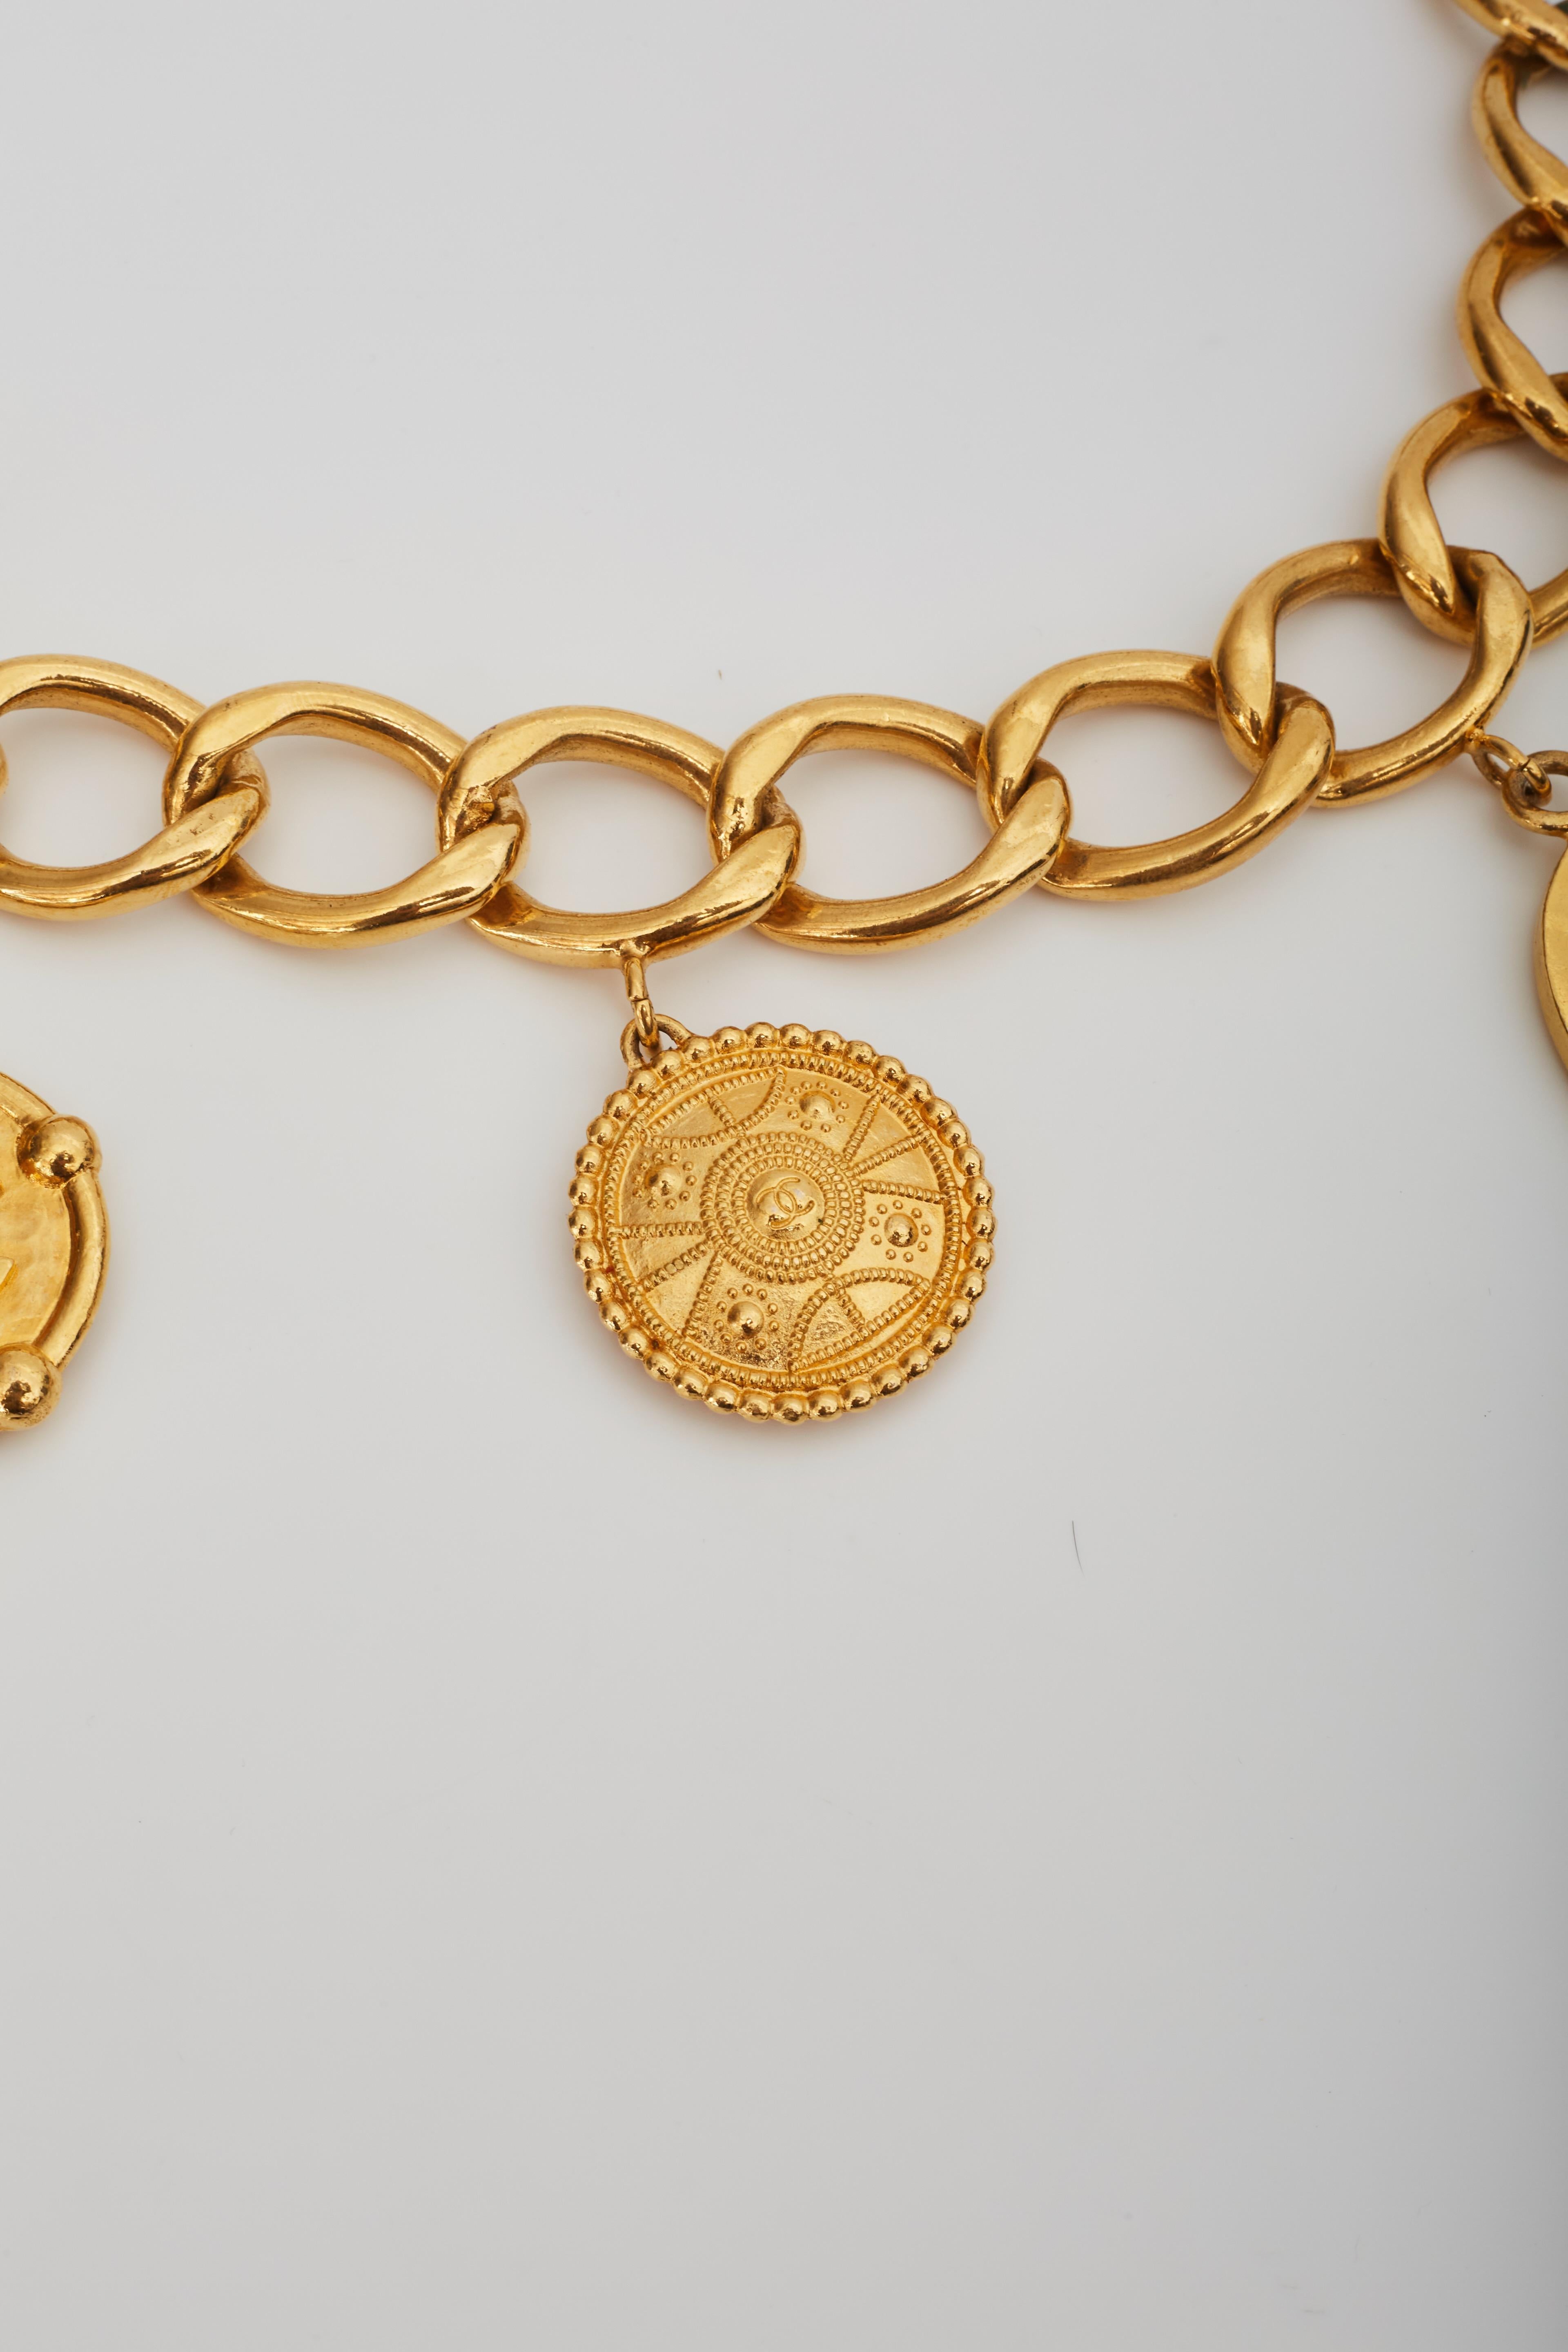 Chanel Logo Coin Medallion Charm Gold Chain Necklace Belt (1993) 26inch 2